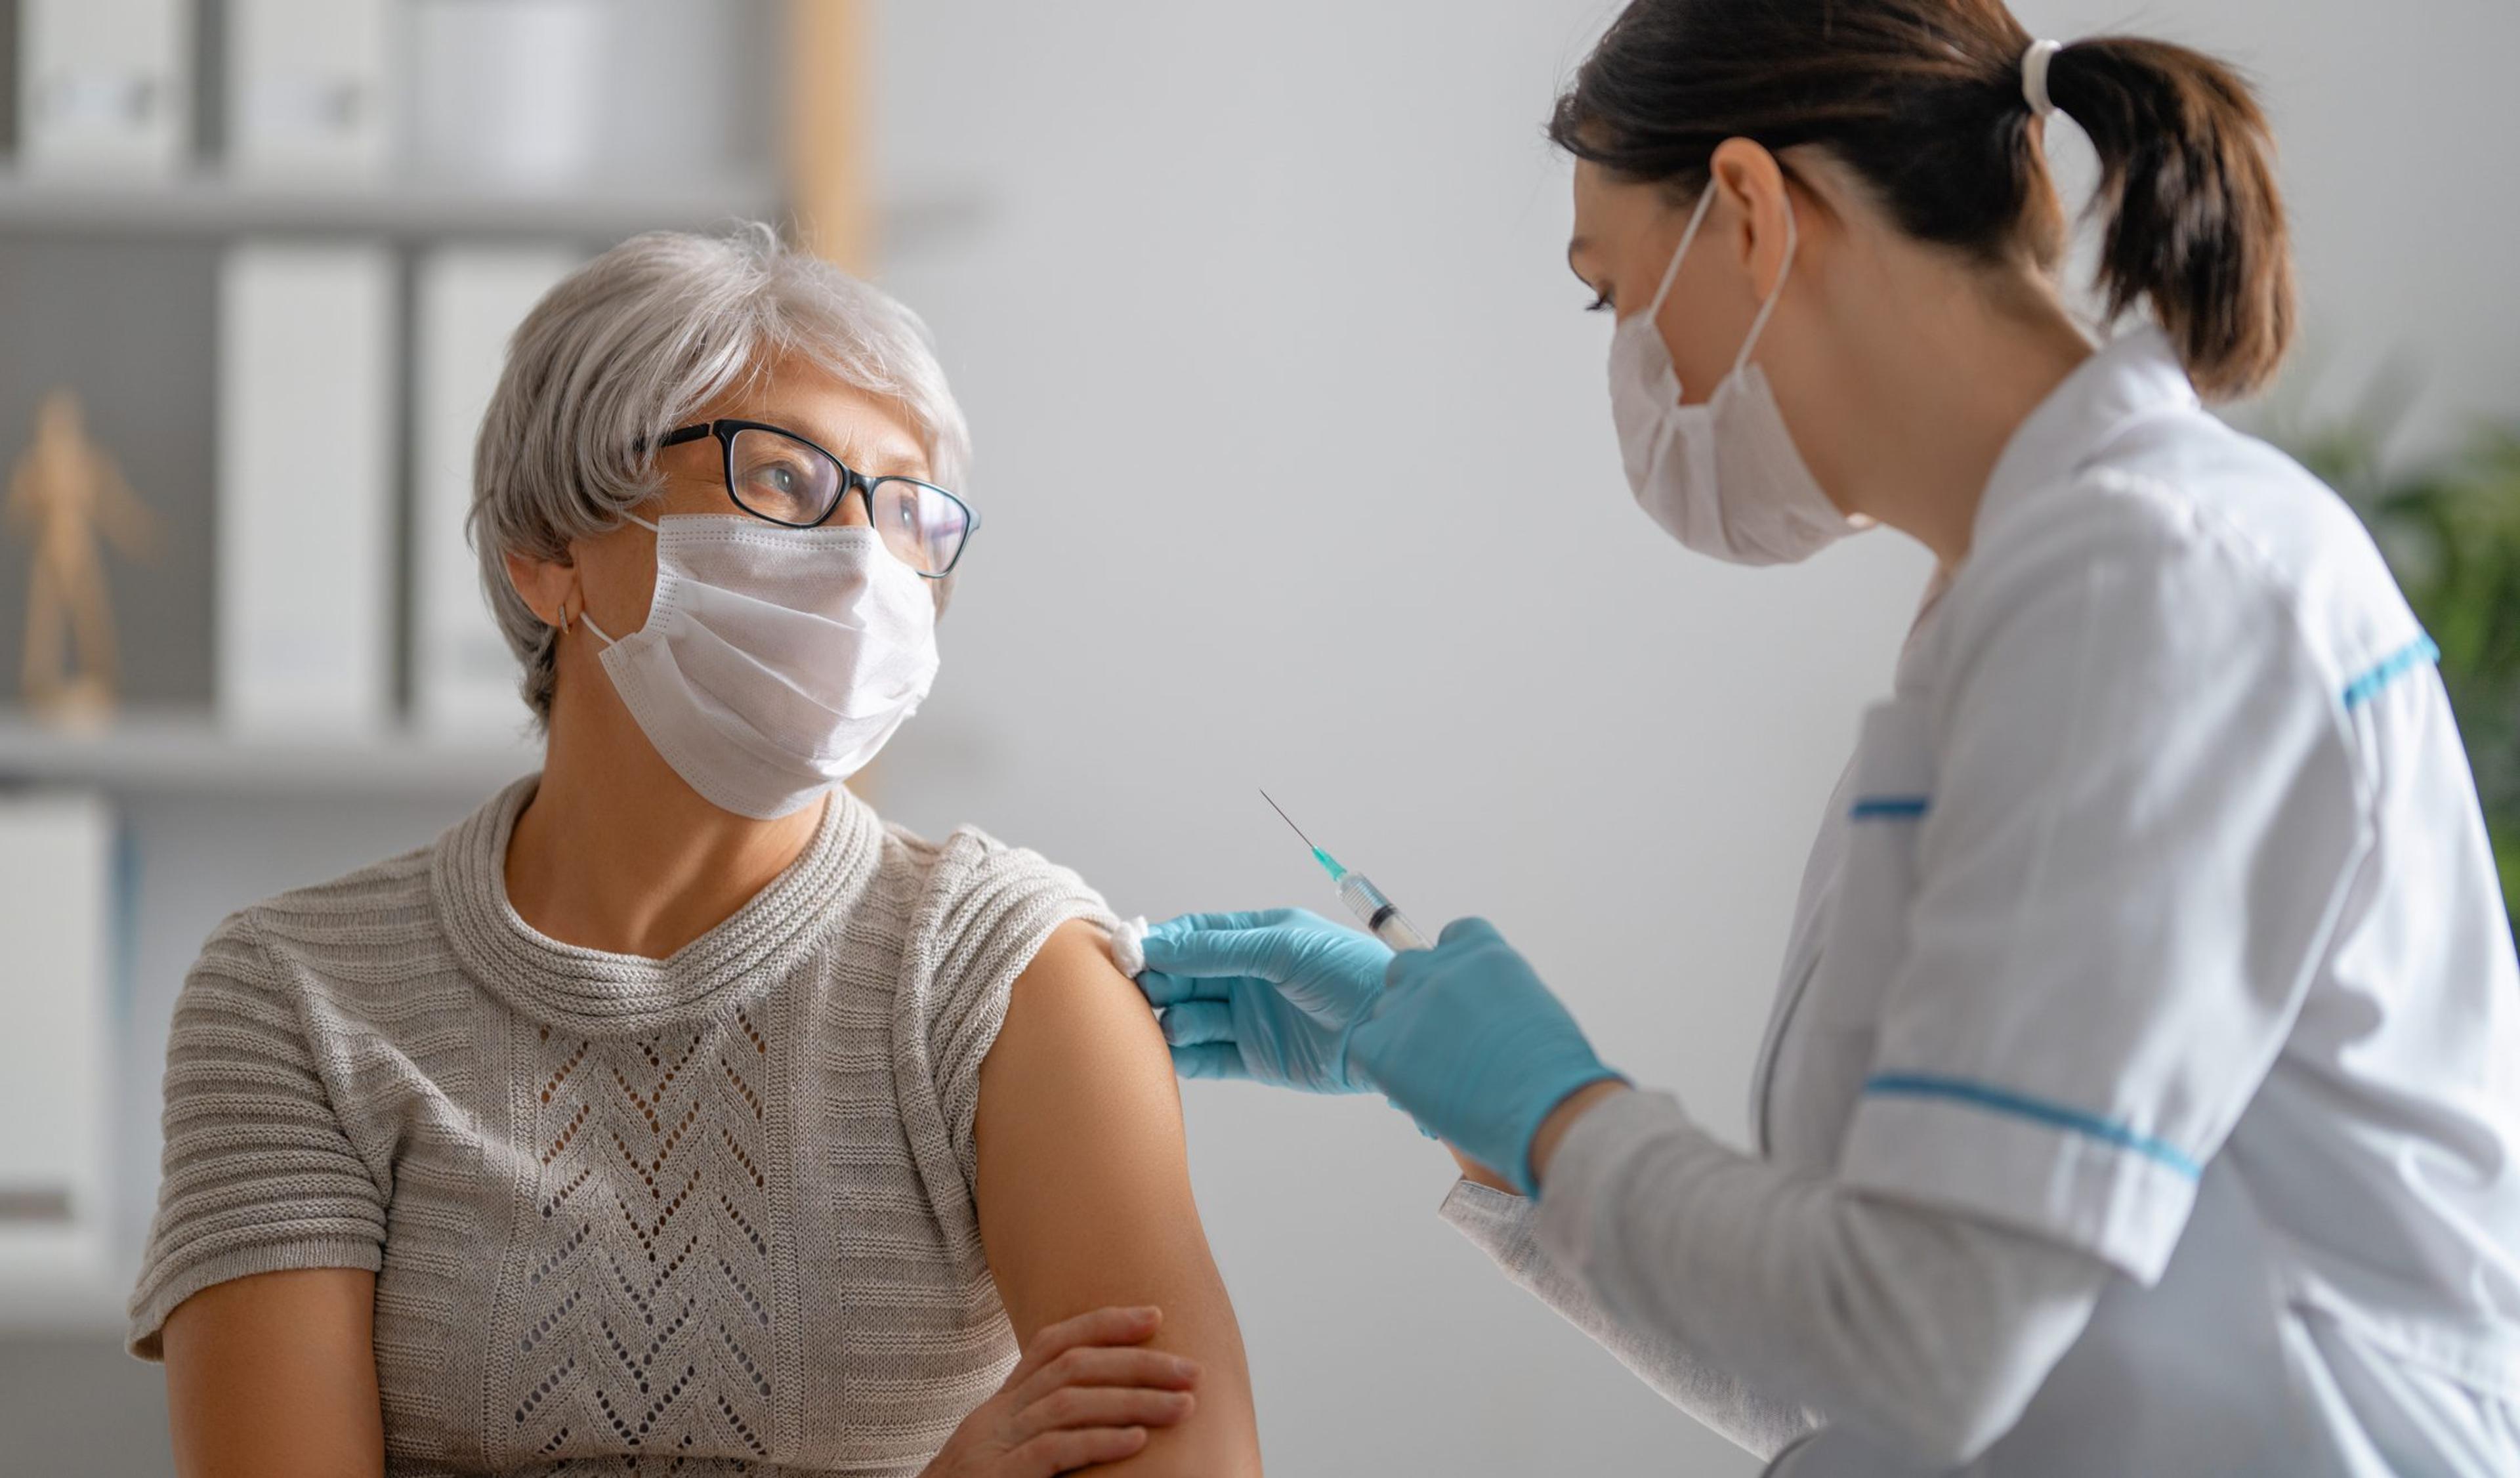 Doctor wearing a mask and gloves gives an older woman a COVID booster vaccine